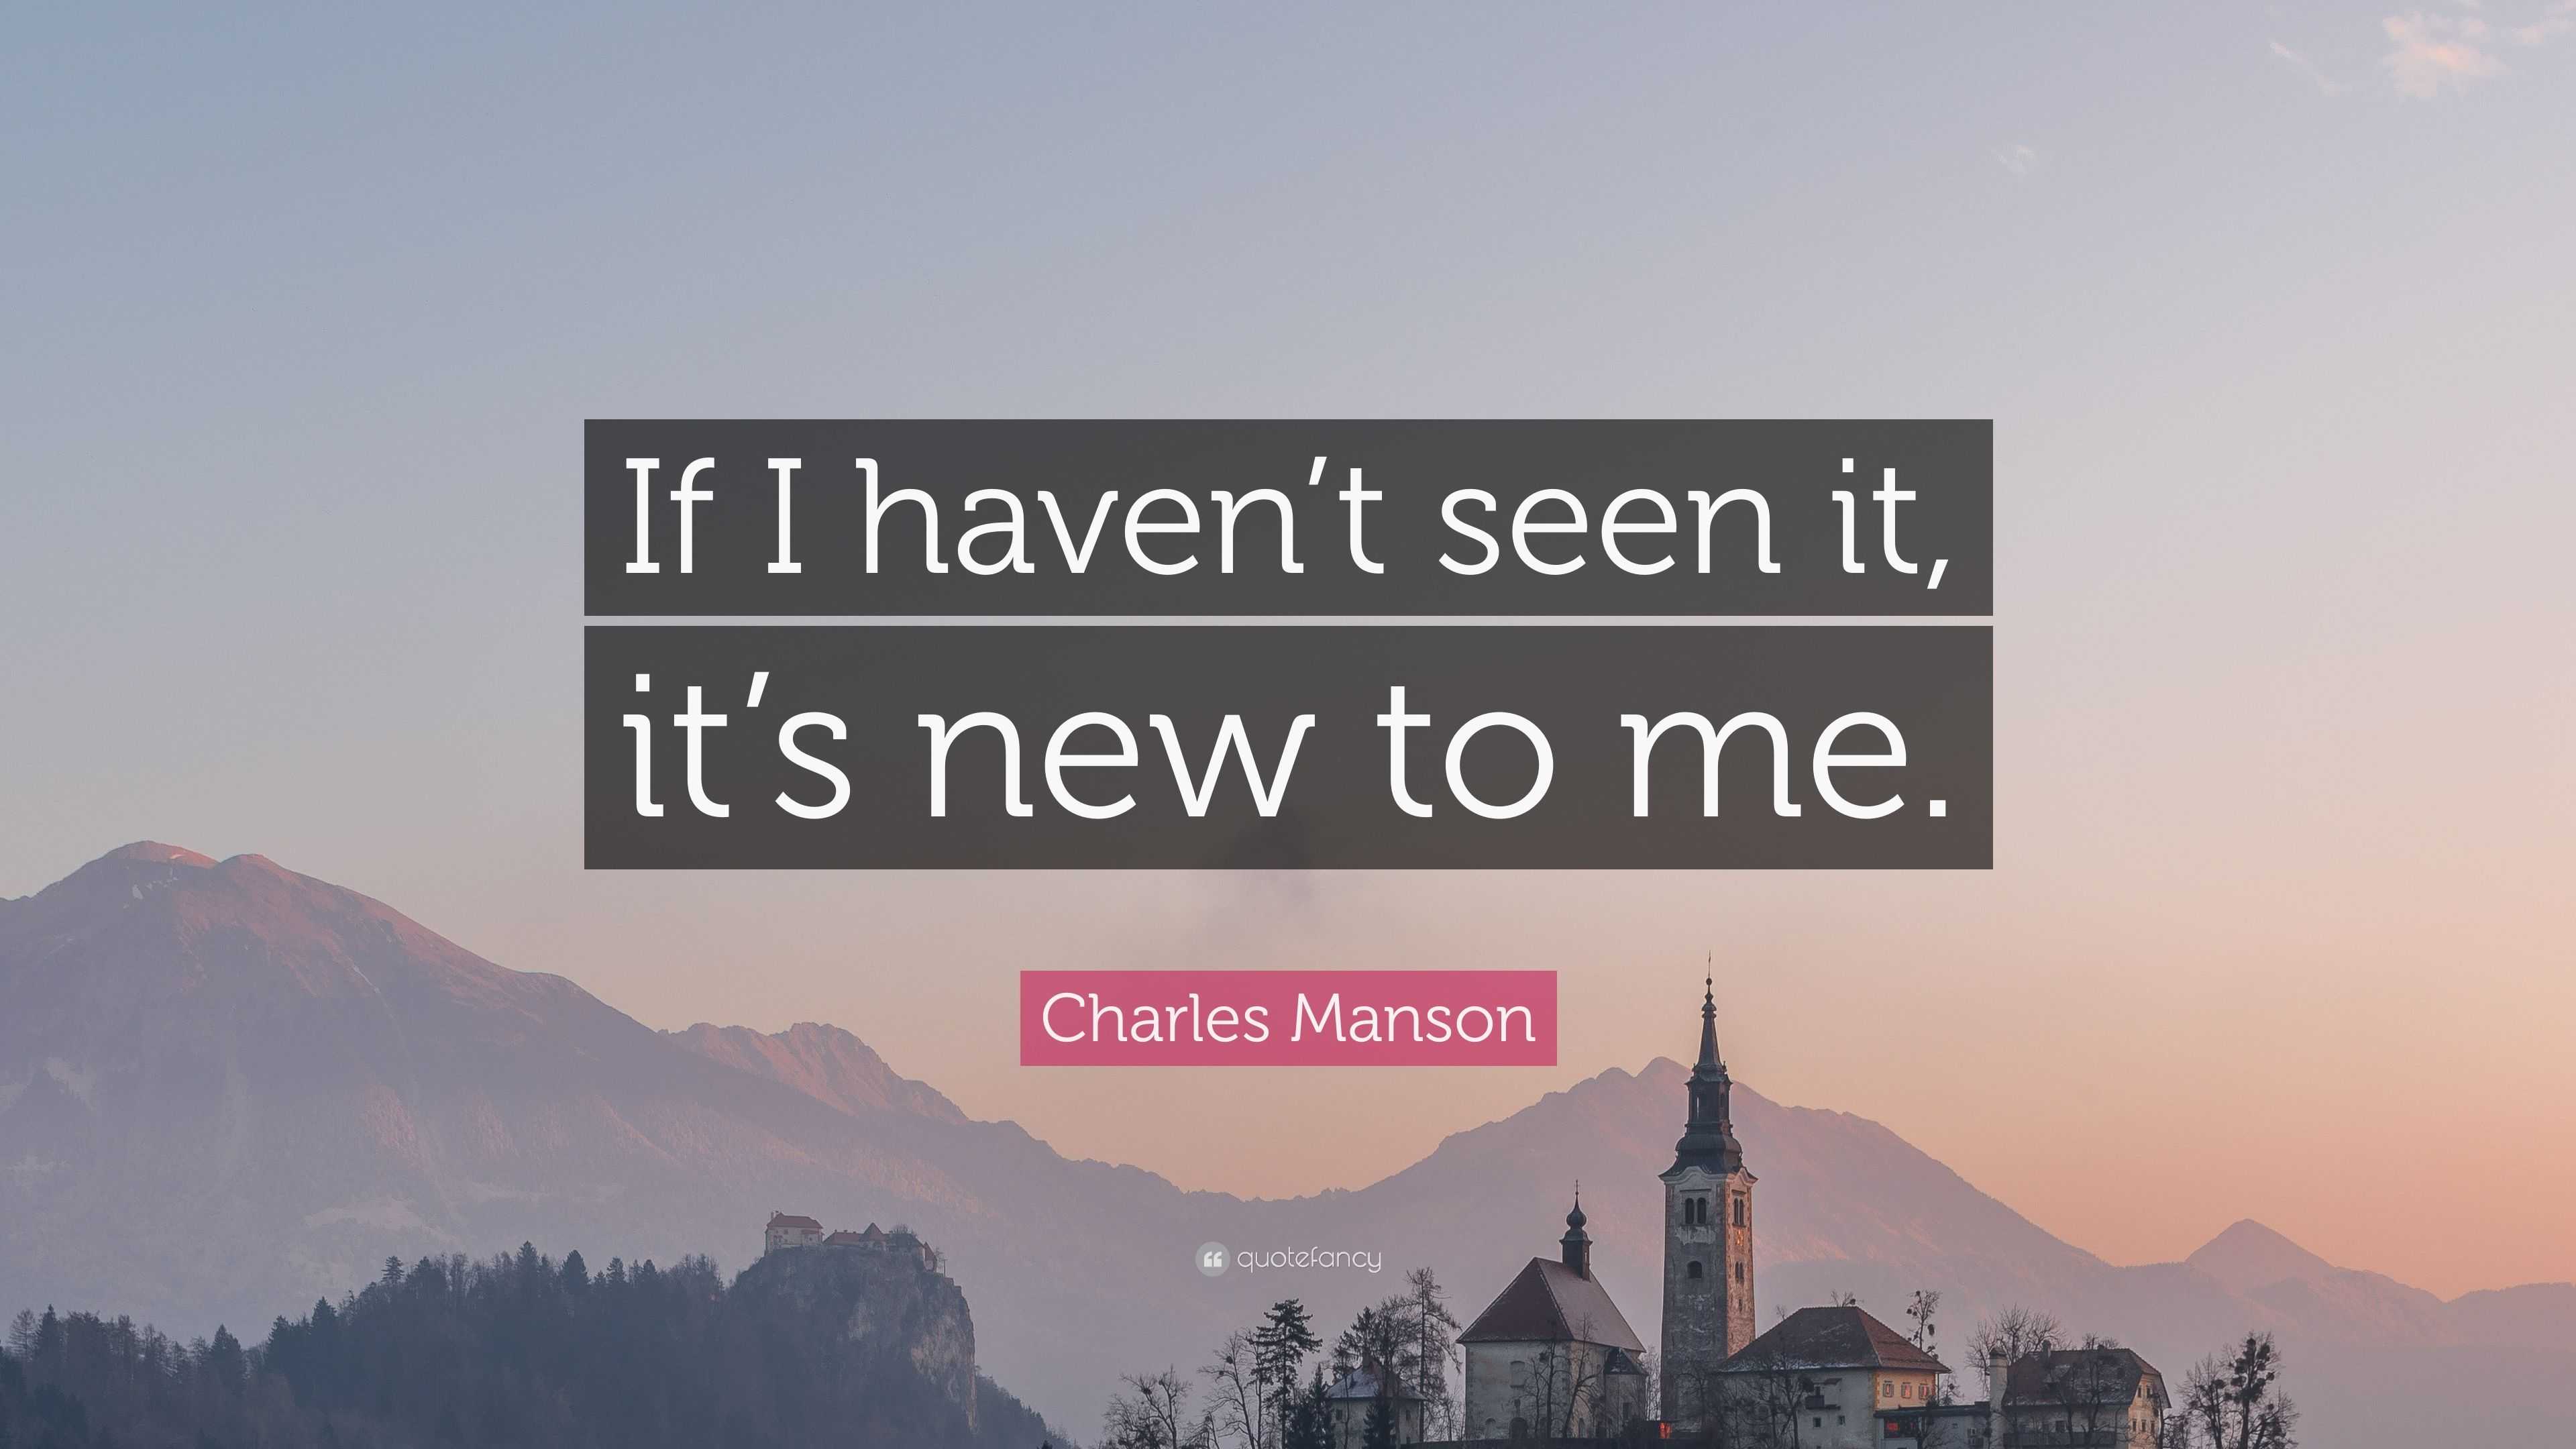 charles manson quote: "if i haven"t seen it, it"s new to me.